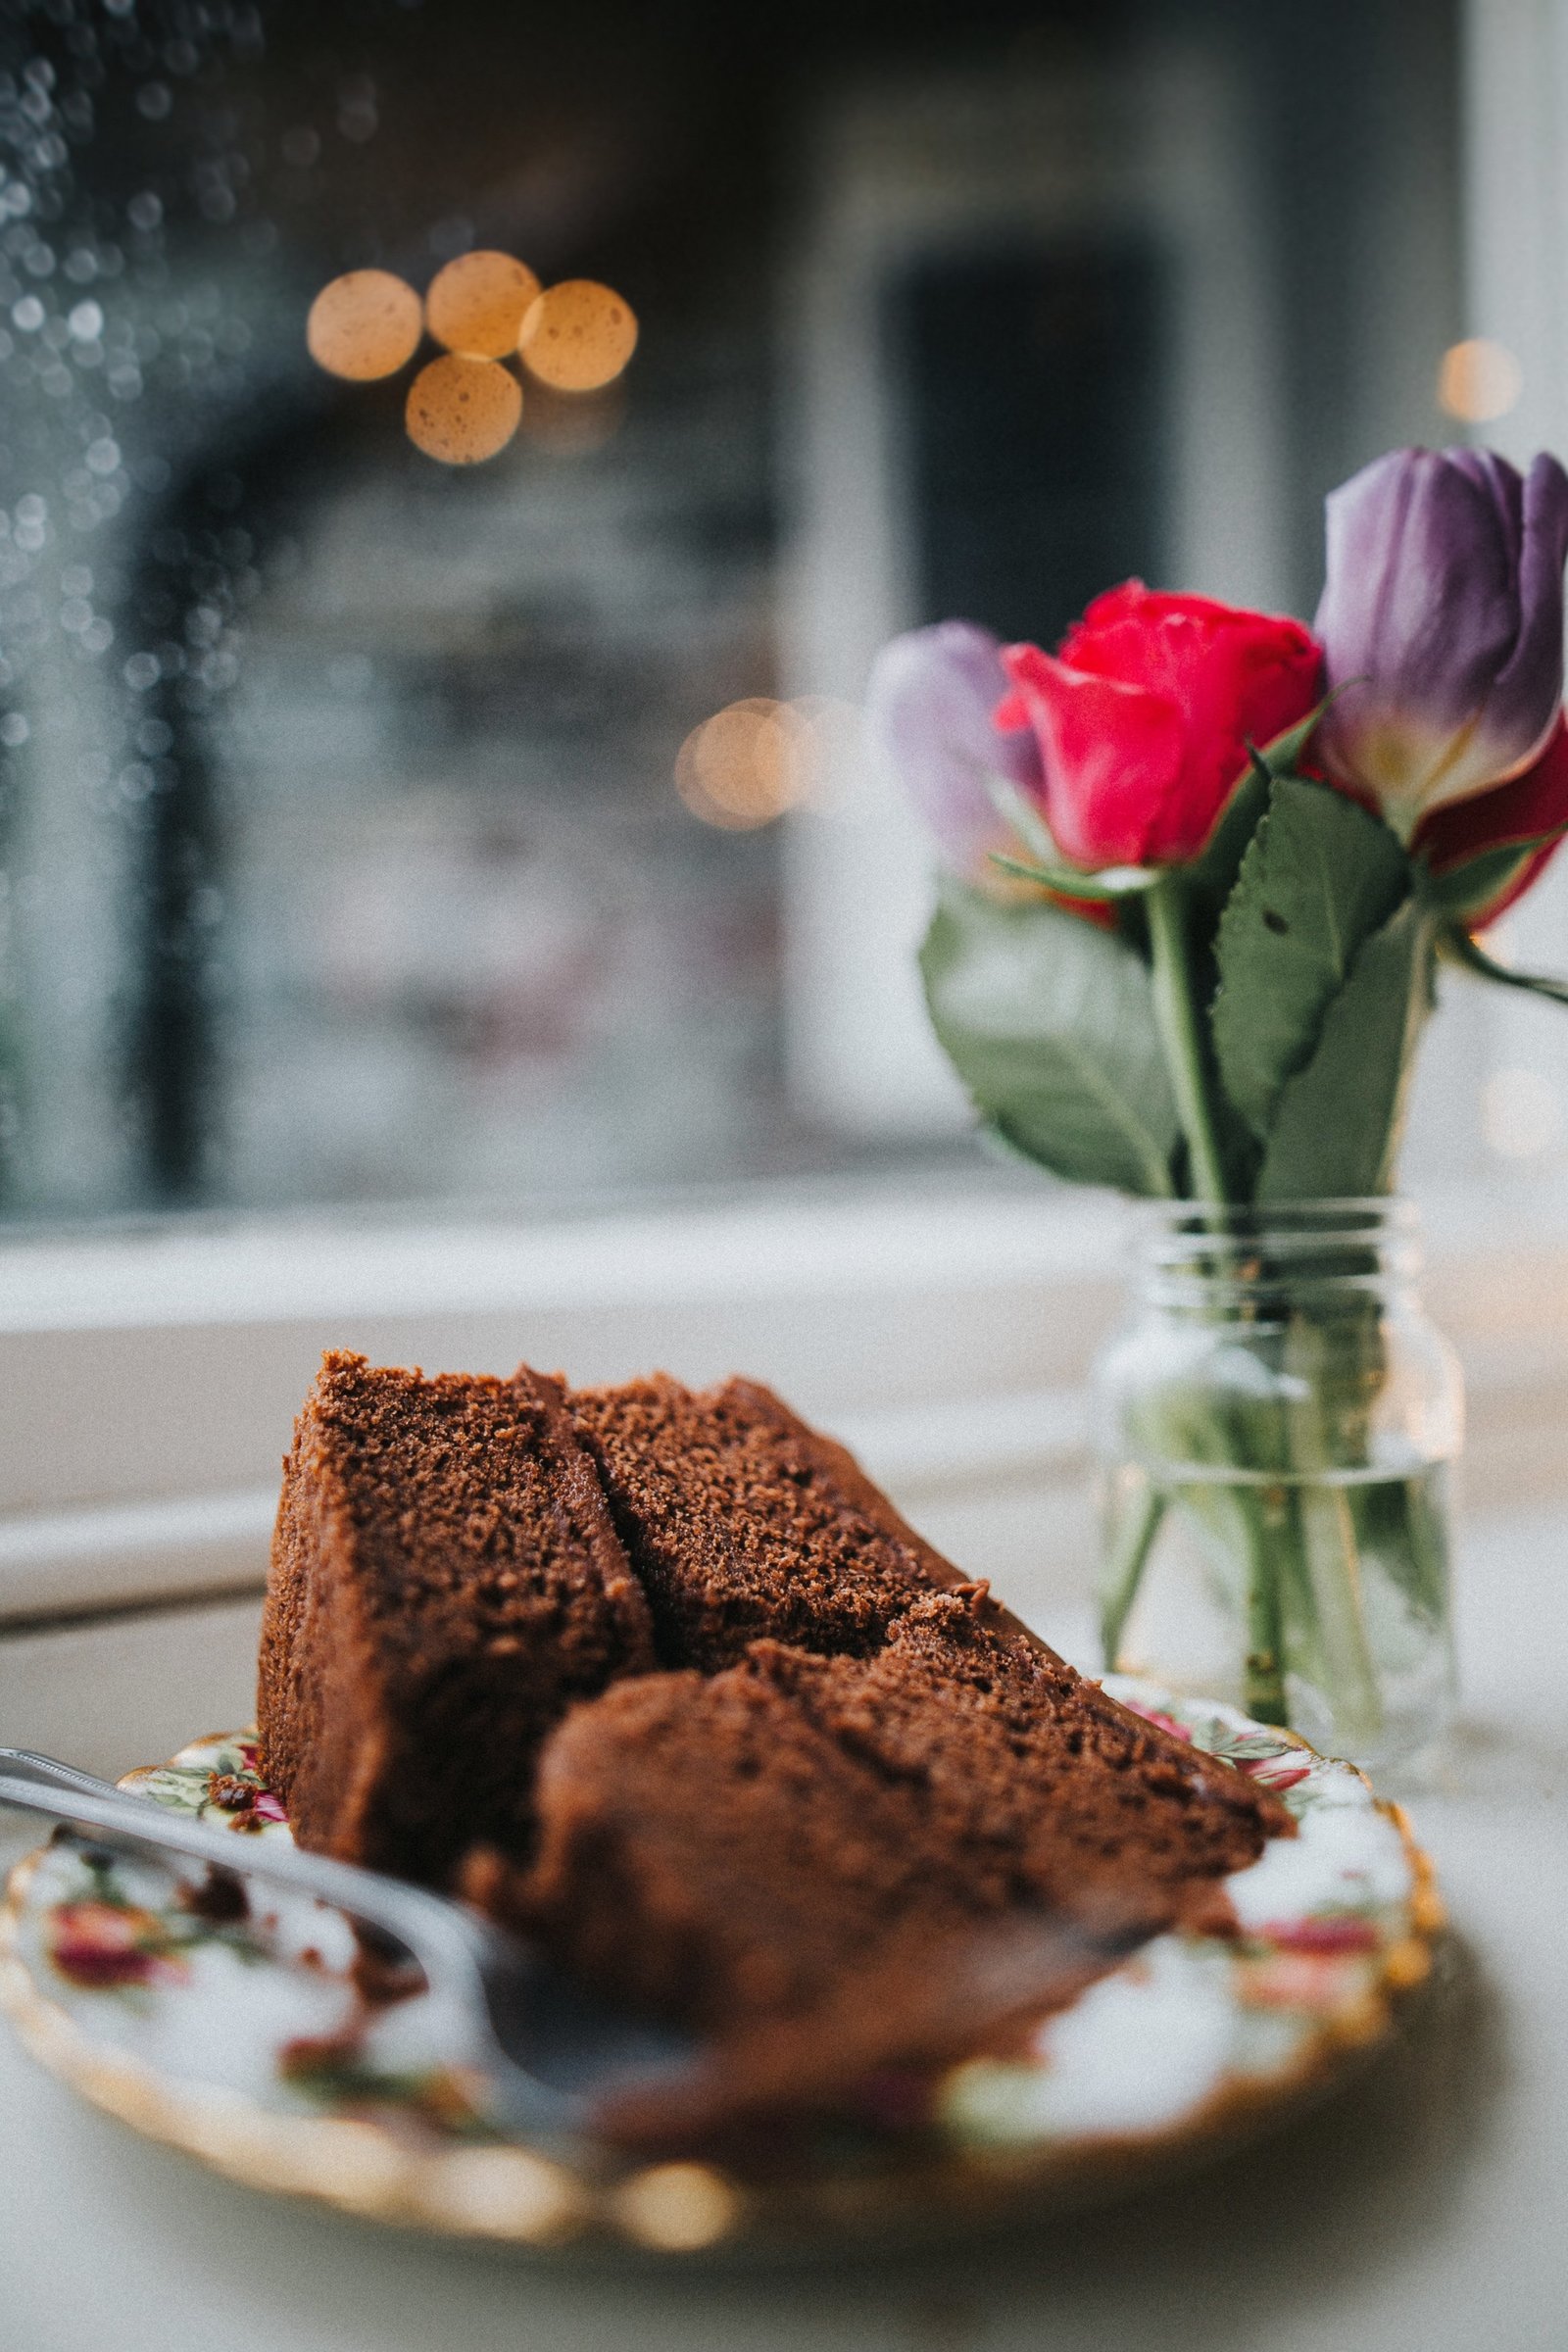 Slice of chocolate cake with bunch of flowers